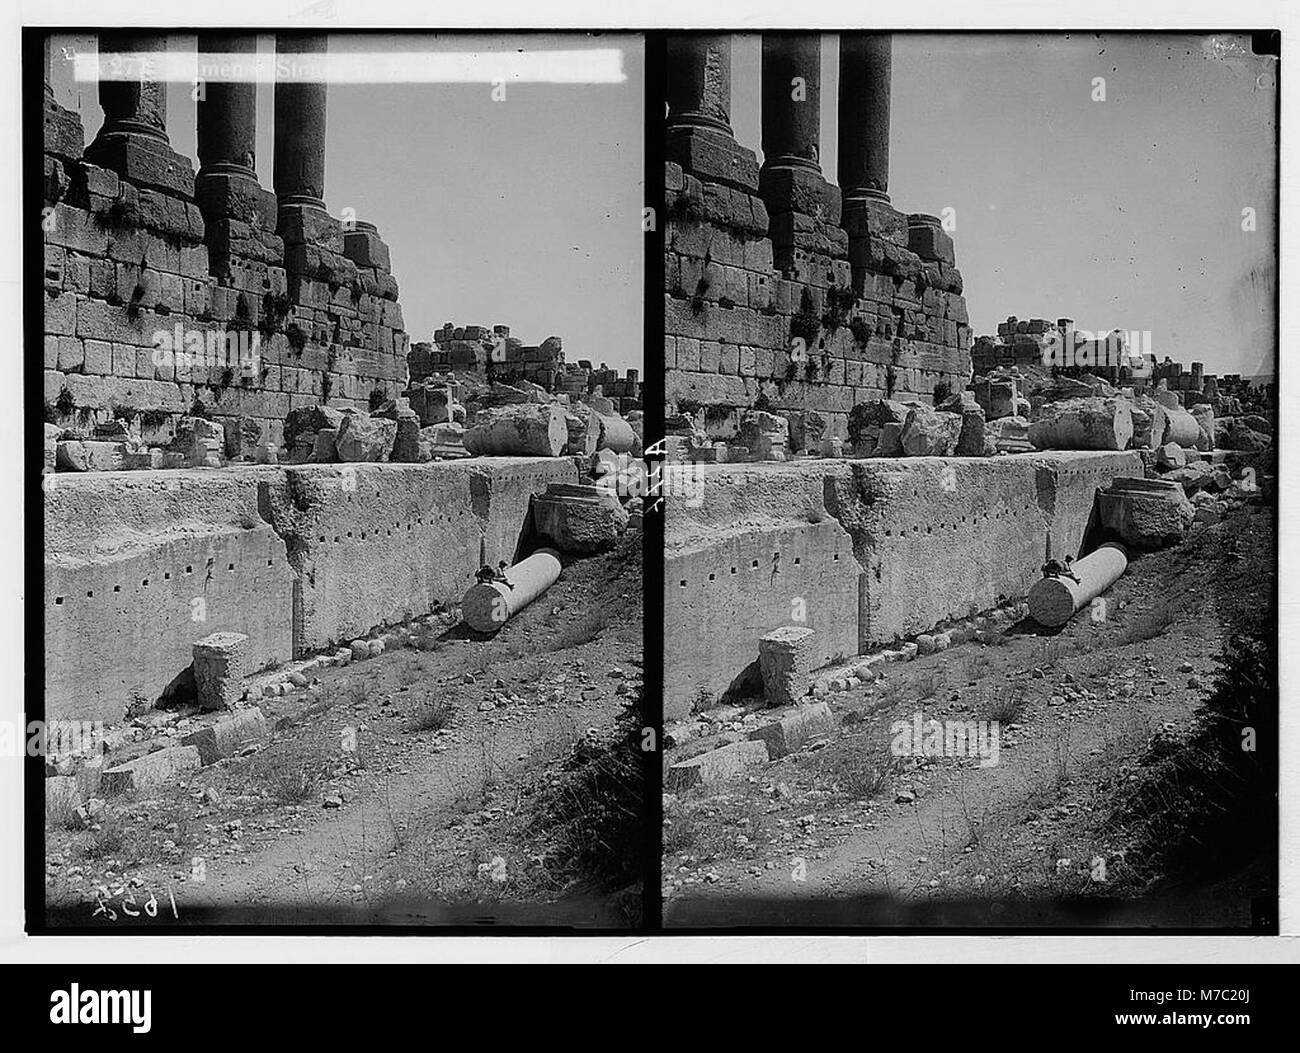 Baalbek. Temple of the sun. Immense stones in foundation of the great temple LOC matpc.05219 Stock Photo